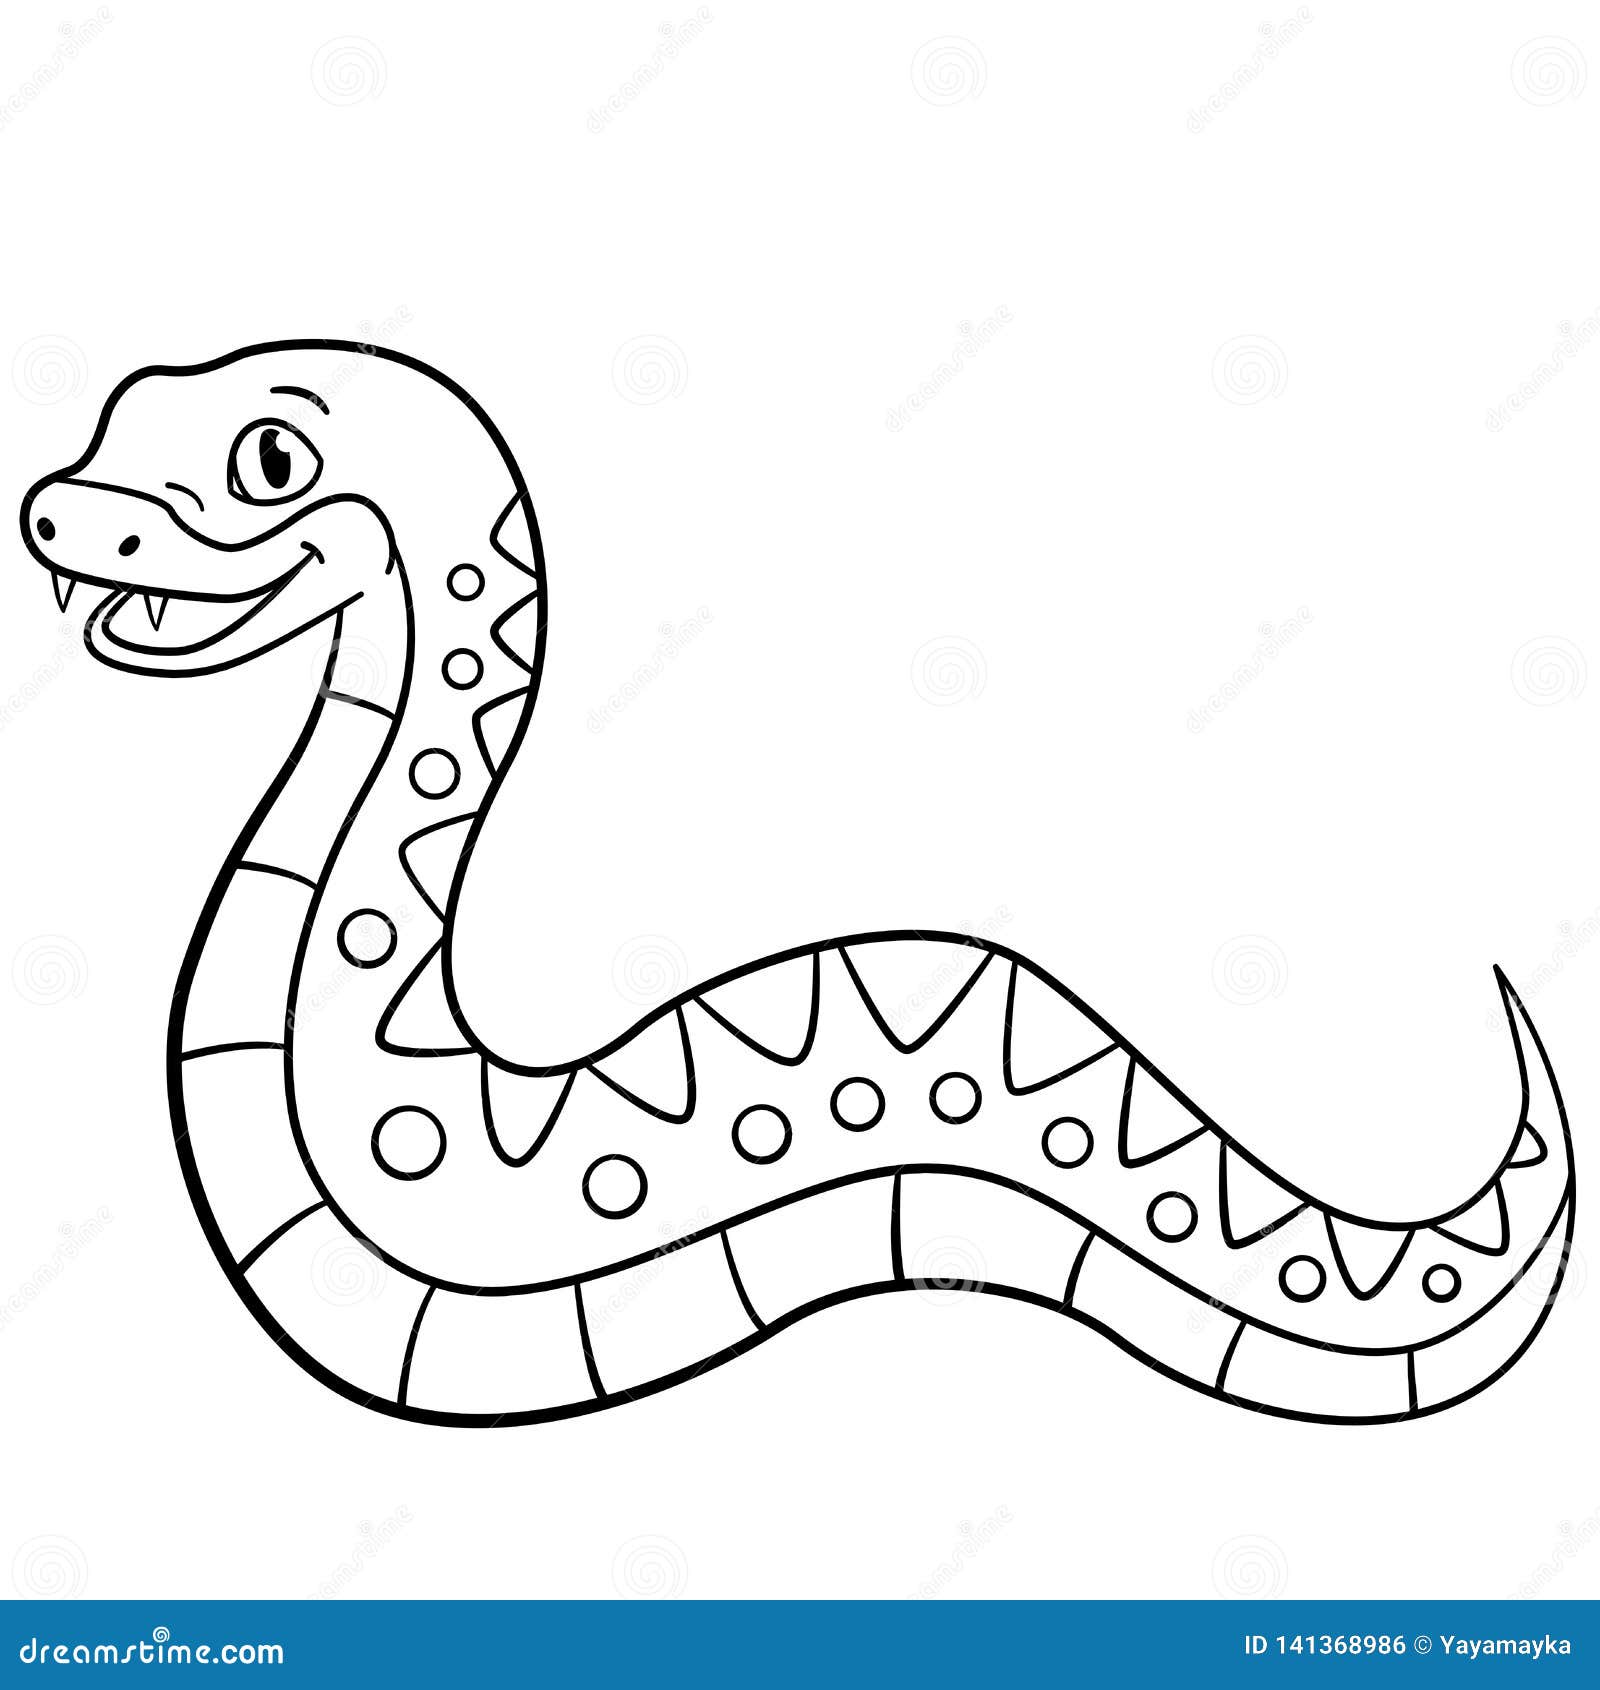 Coloring Pages Little Cute Viper Smiles Stock Vector Illustration Of Danger Kids 141368986